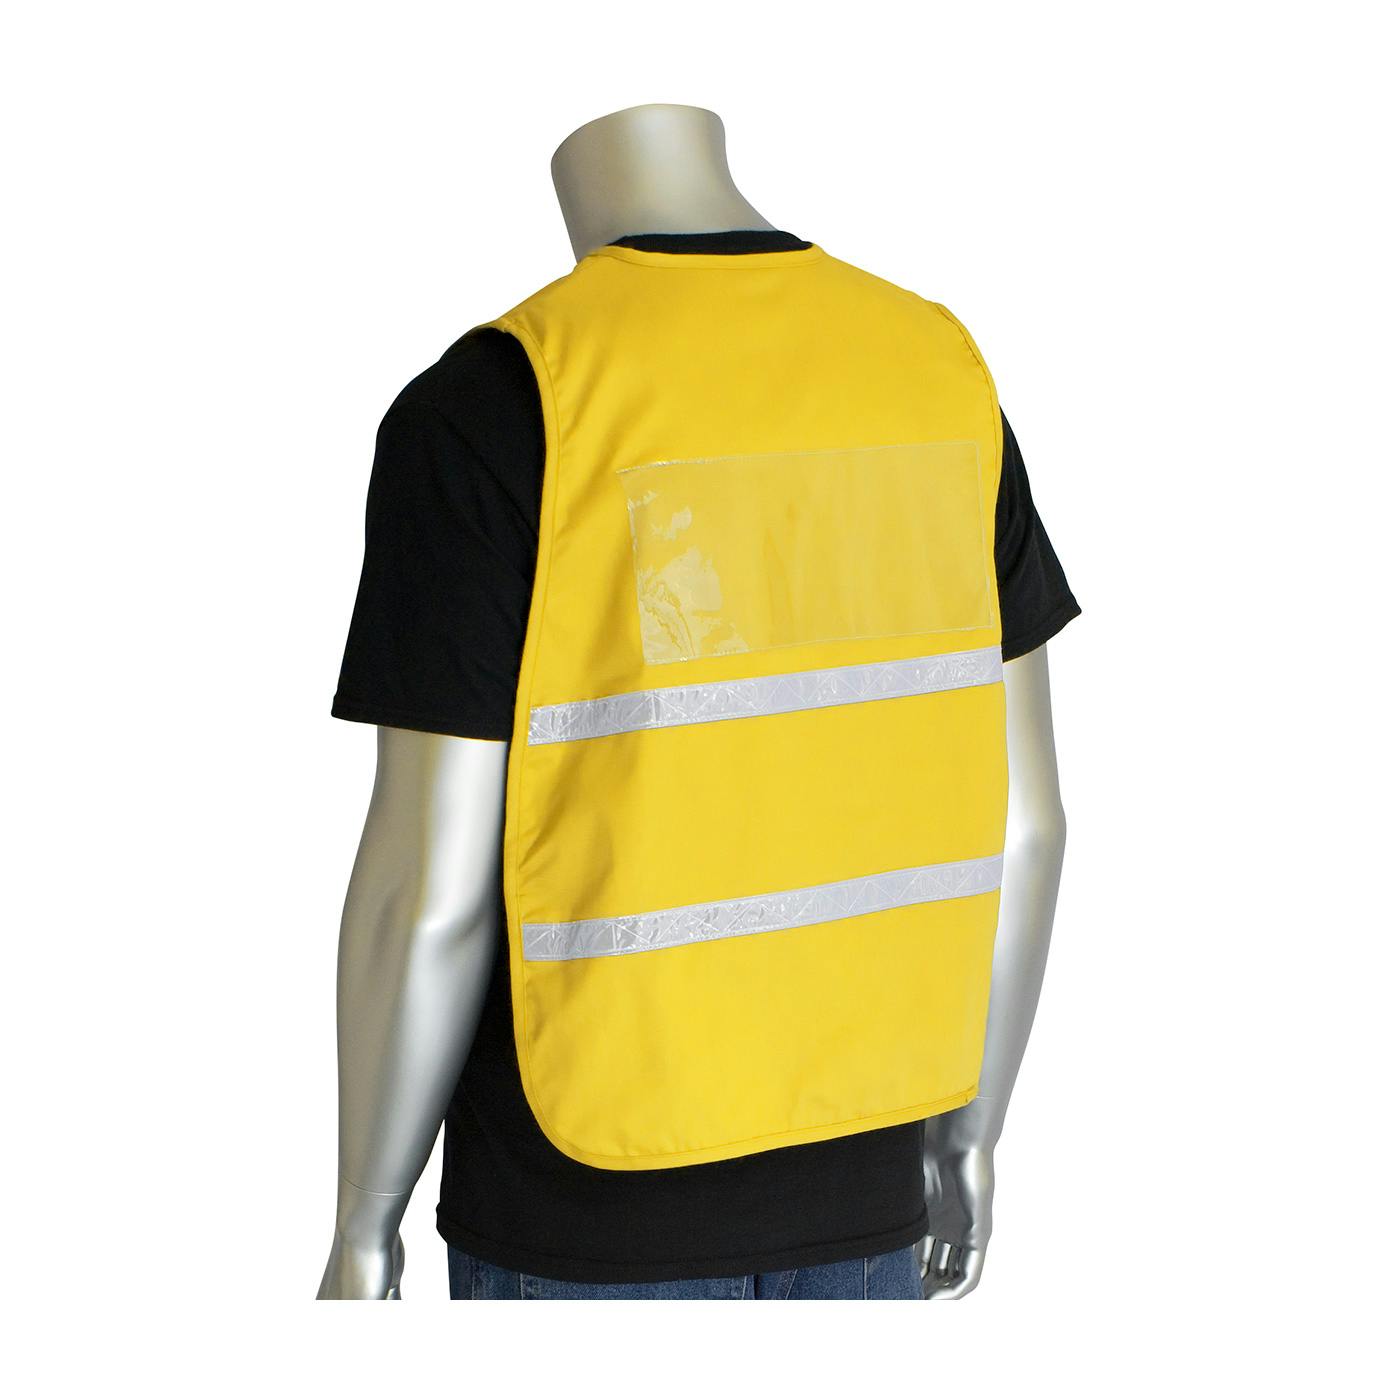 Non-ANSI Incident Command Vest - Cotton/Polyester Blend, Yellow (300-2510)